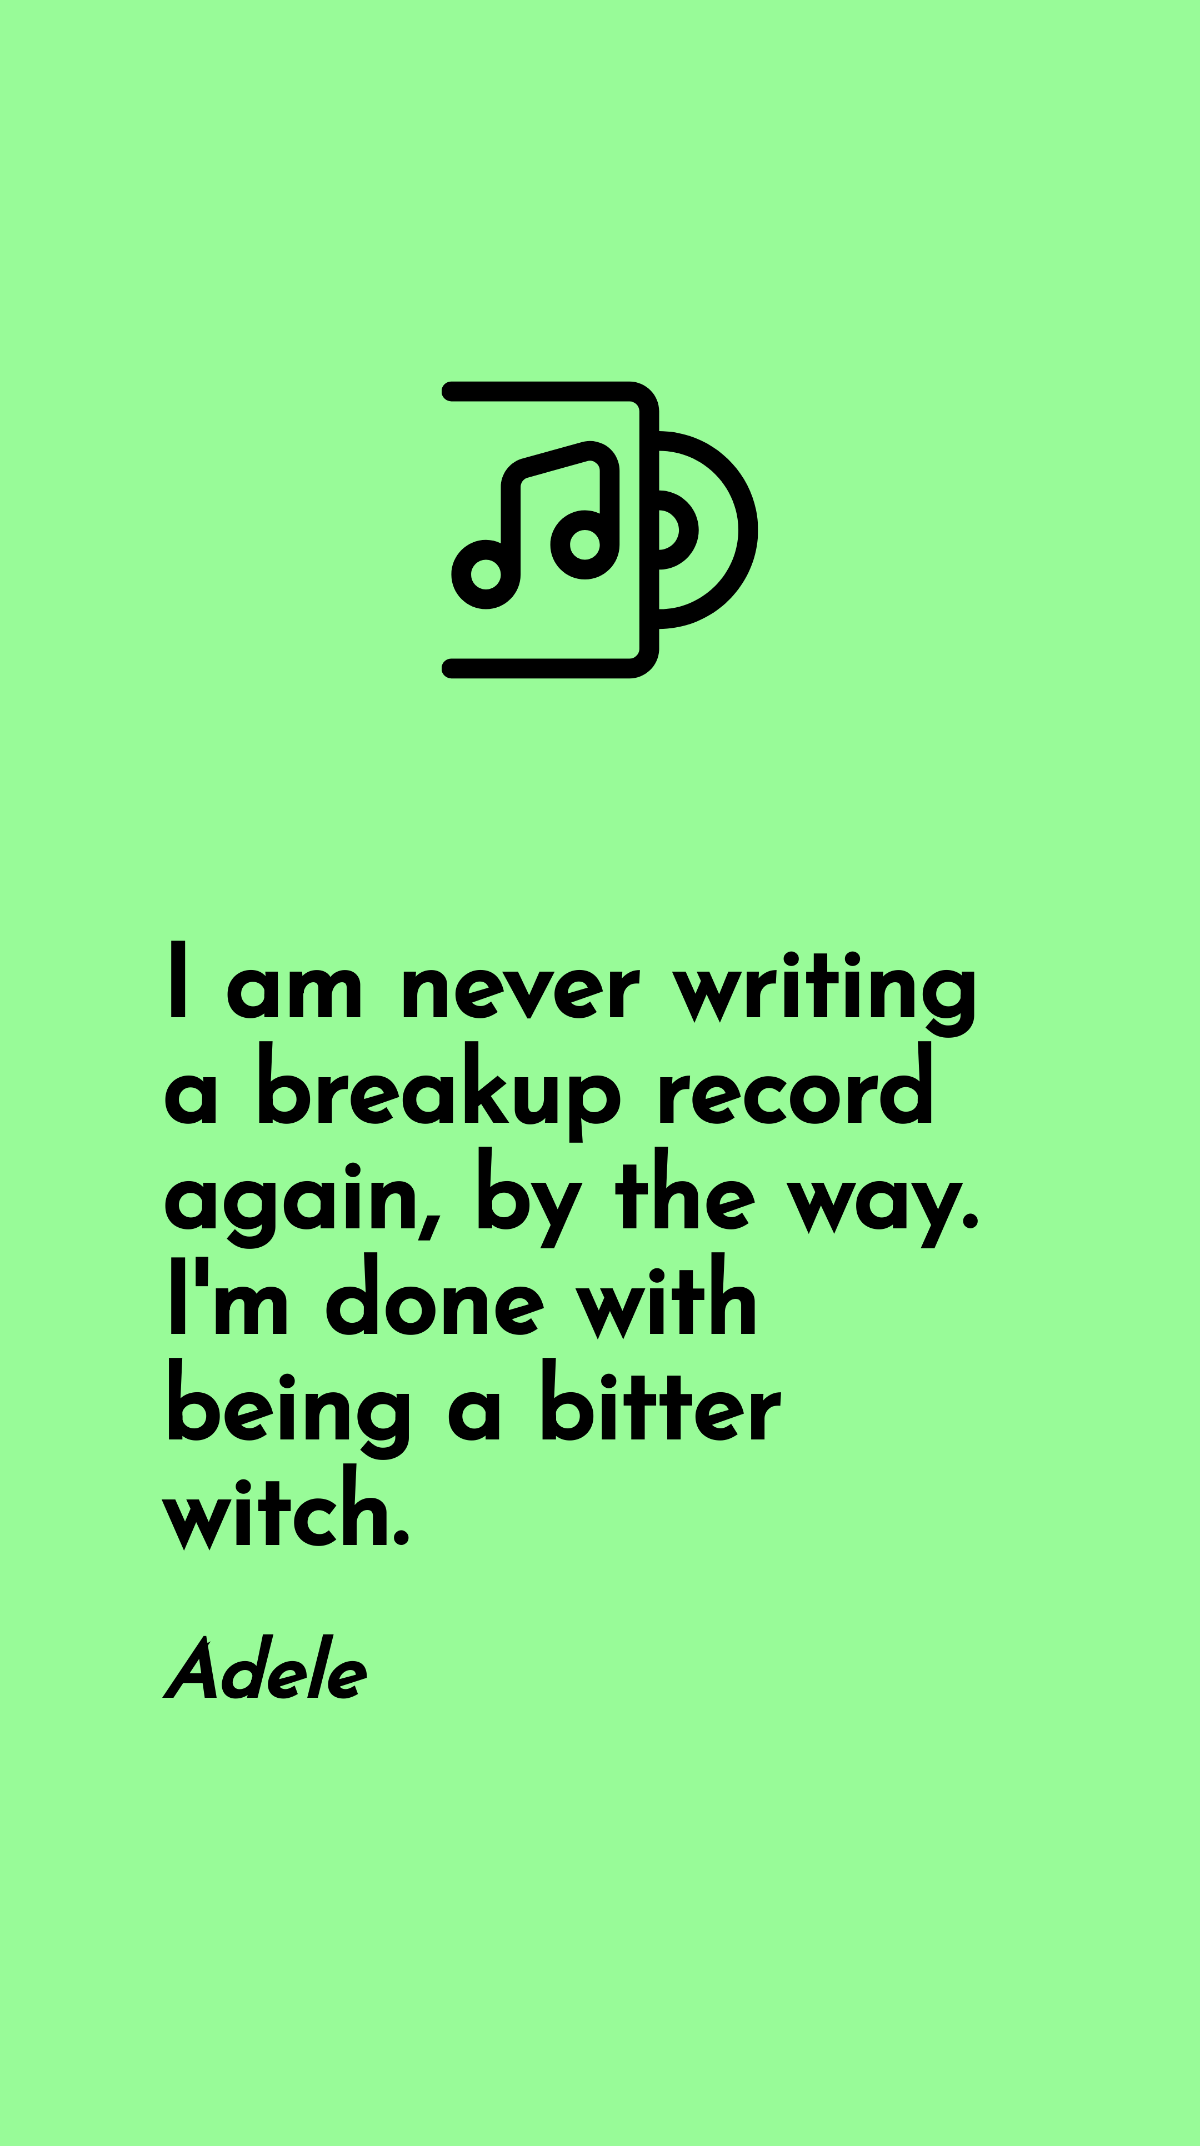 Adele - I am never writing a breakup record again, by the way. I'm done with being a bitter witch. Template